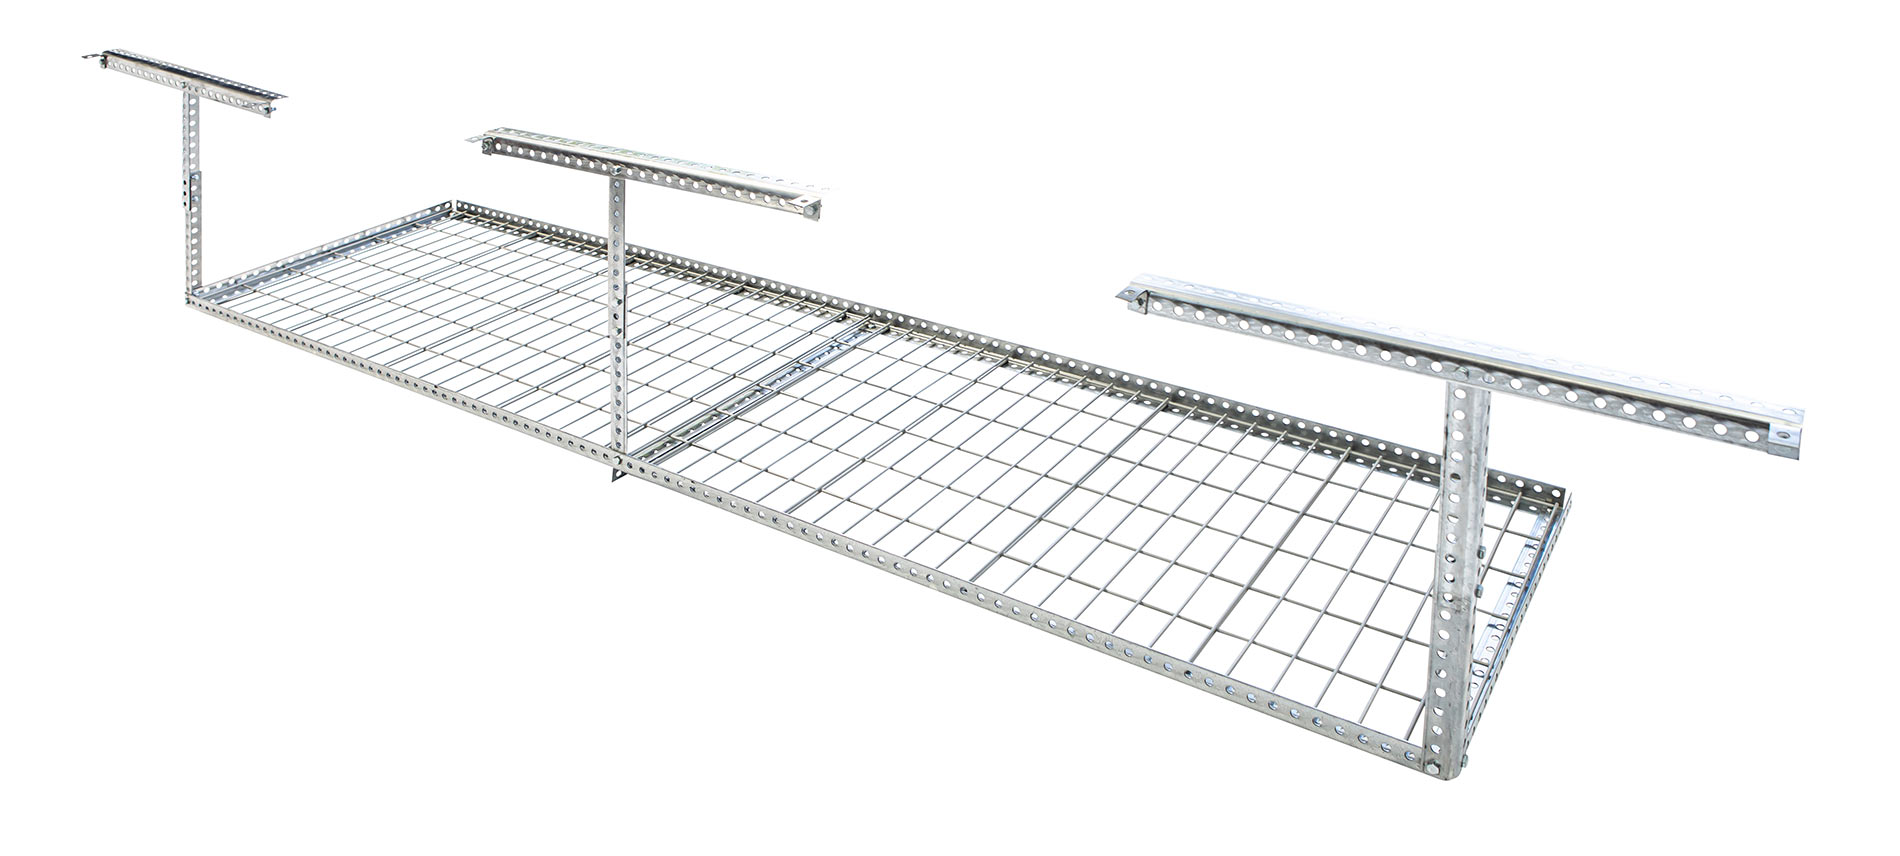 Overhead Ceiling Storage Rack - 2' by 8' with Decking